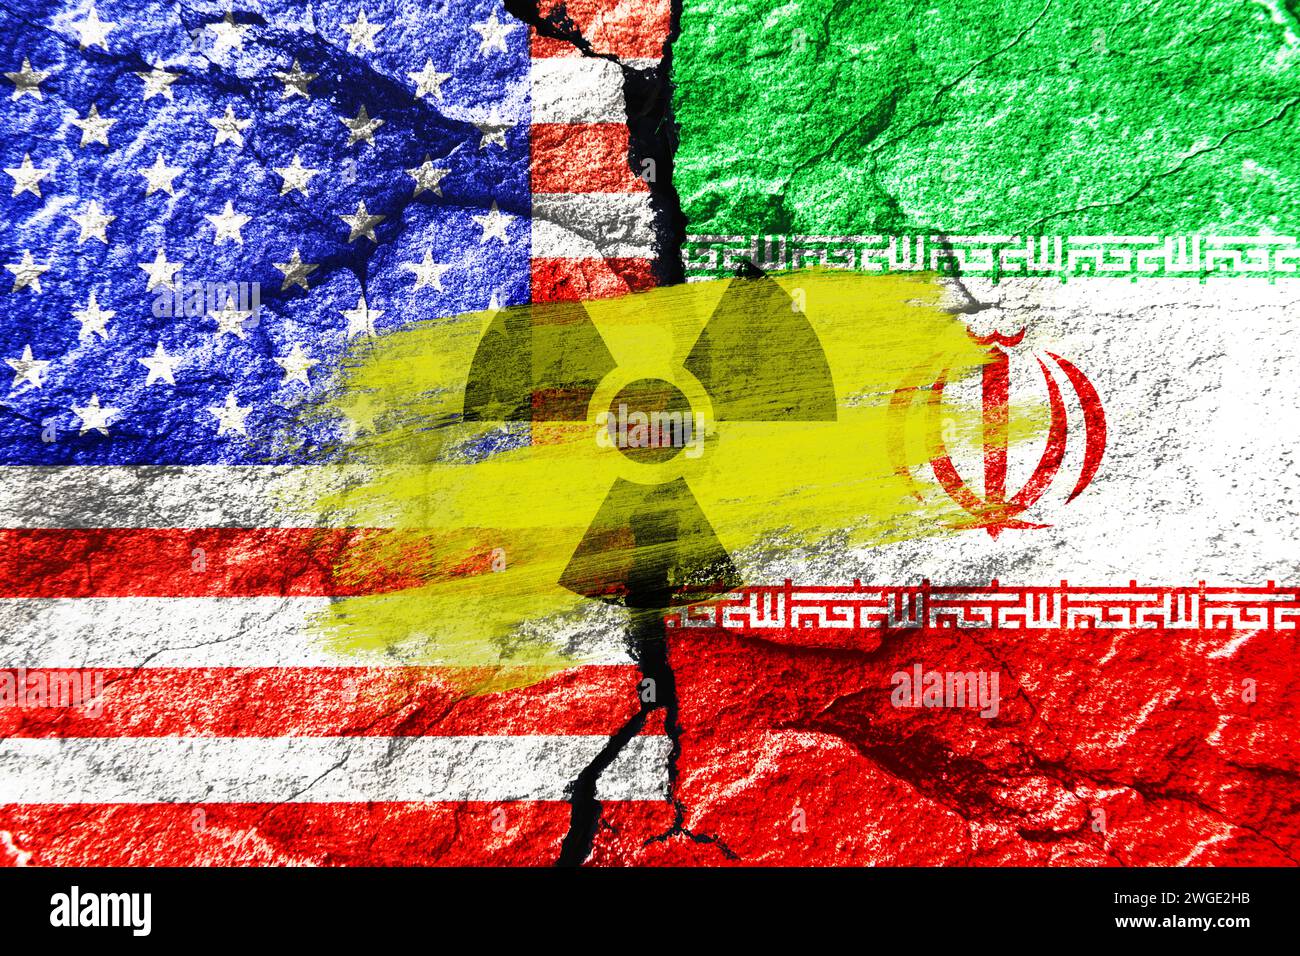 Flags Of The United States And Iran On Broken Ground With Radioactivity Sign, Photomontage Stock Photo